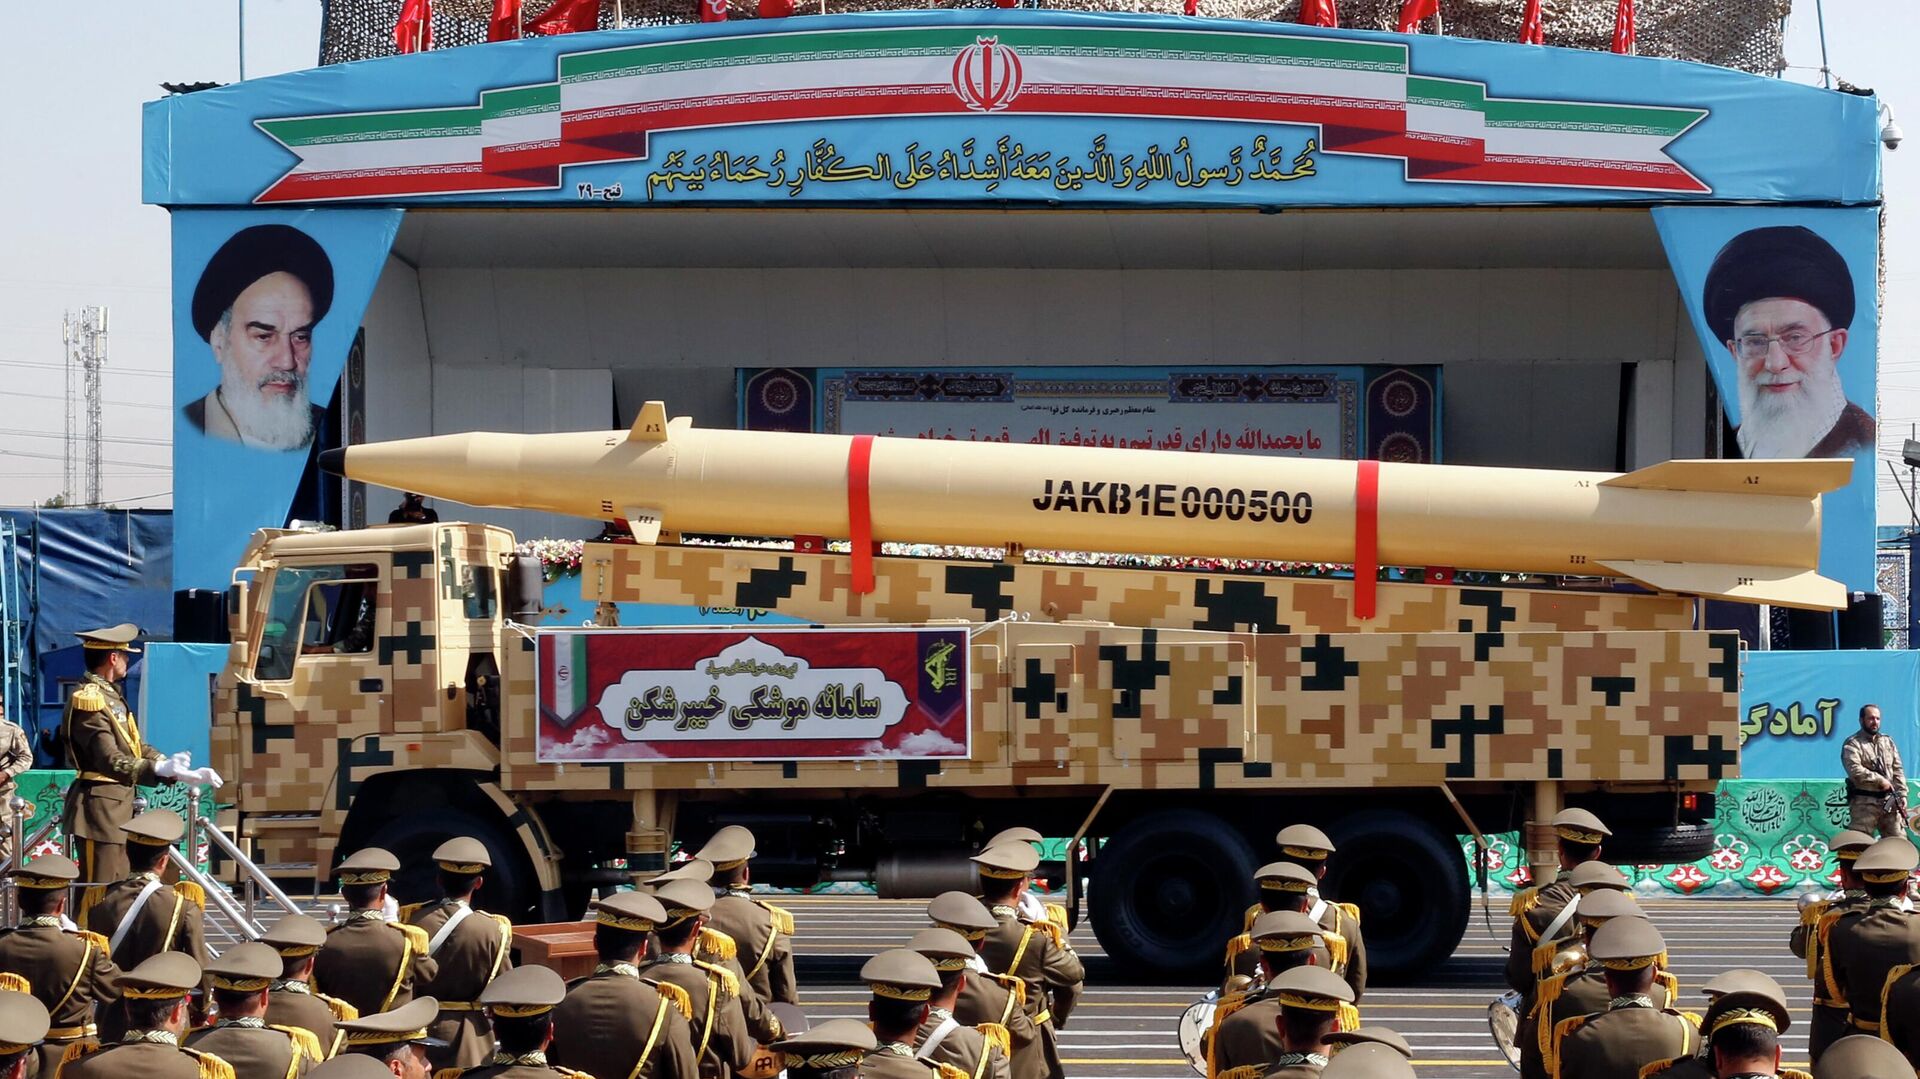 Iranian missile Kheibar Shekan on display during the annual military parade marking the anniversary of the outbreak of the devastating 1980-1988 war with Saddam Hussein's Iraq, in the capital Tehran on September 22, 2022 - Sputnik International, 1920, 22.09.2022